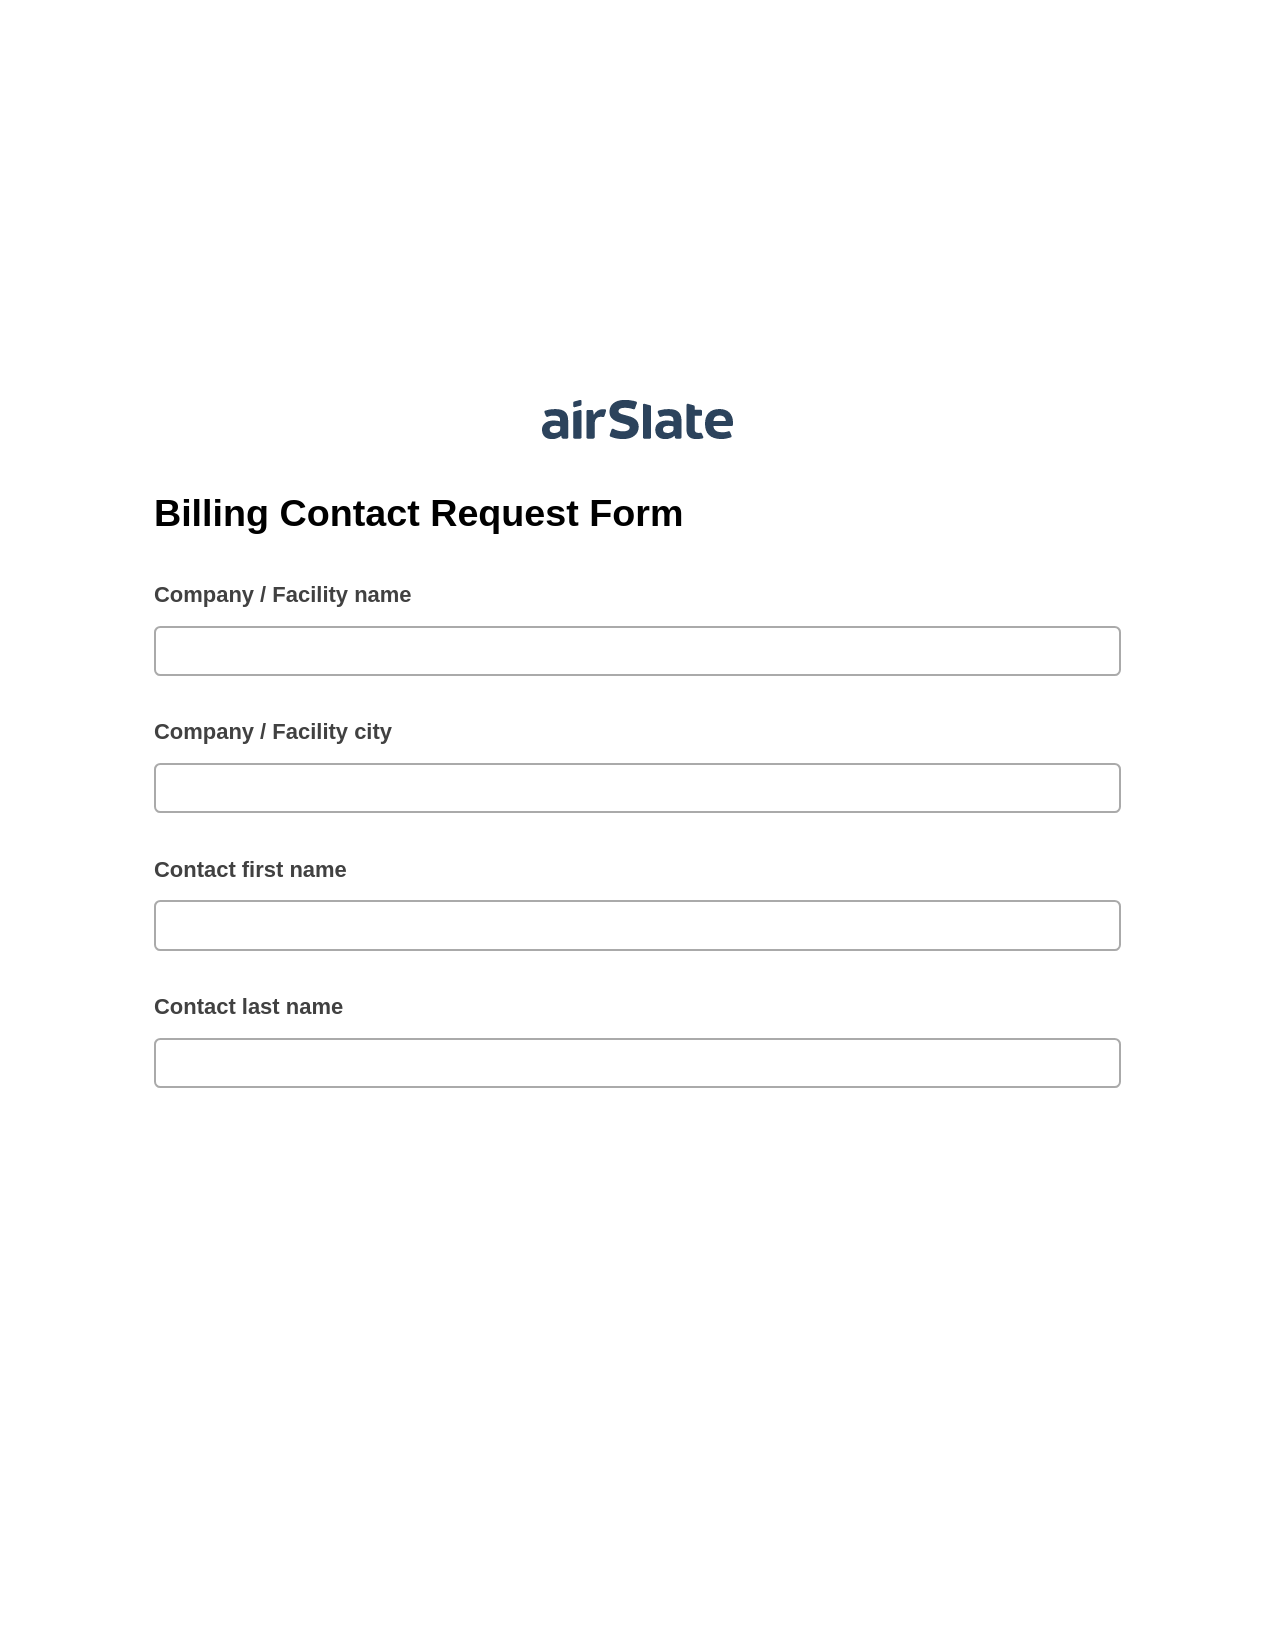 Multirole Billing Contact Request Form Pre-fill from another Slate Bot, Hide Signatures Bot, OneDrive Bot